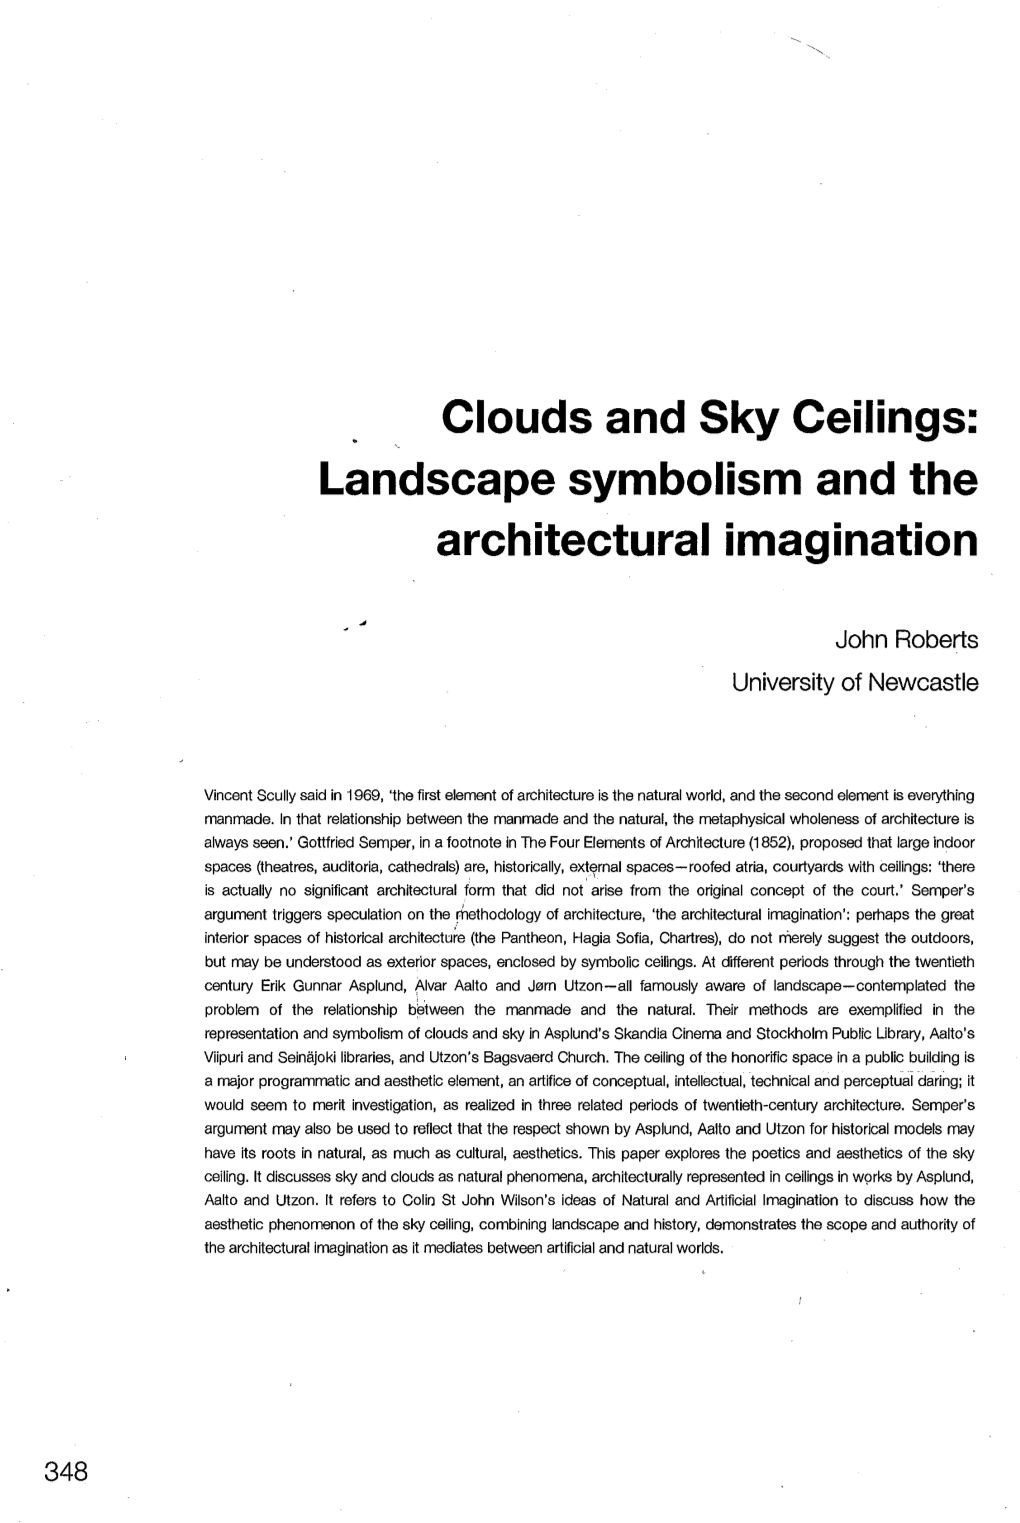 Clouds and Sky Ceilings: Landscape Symbolism and the Architectural Imagination